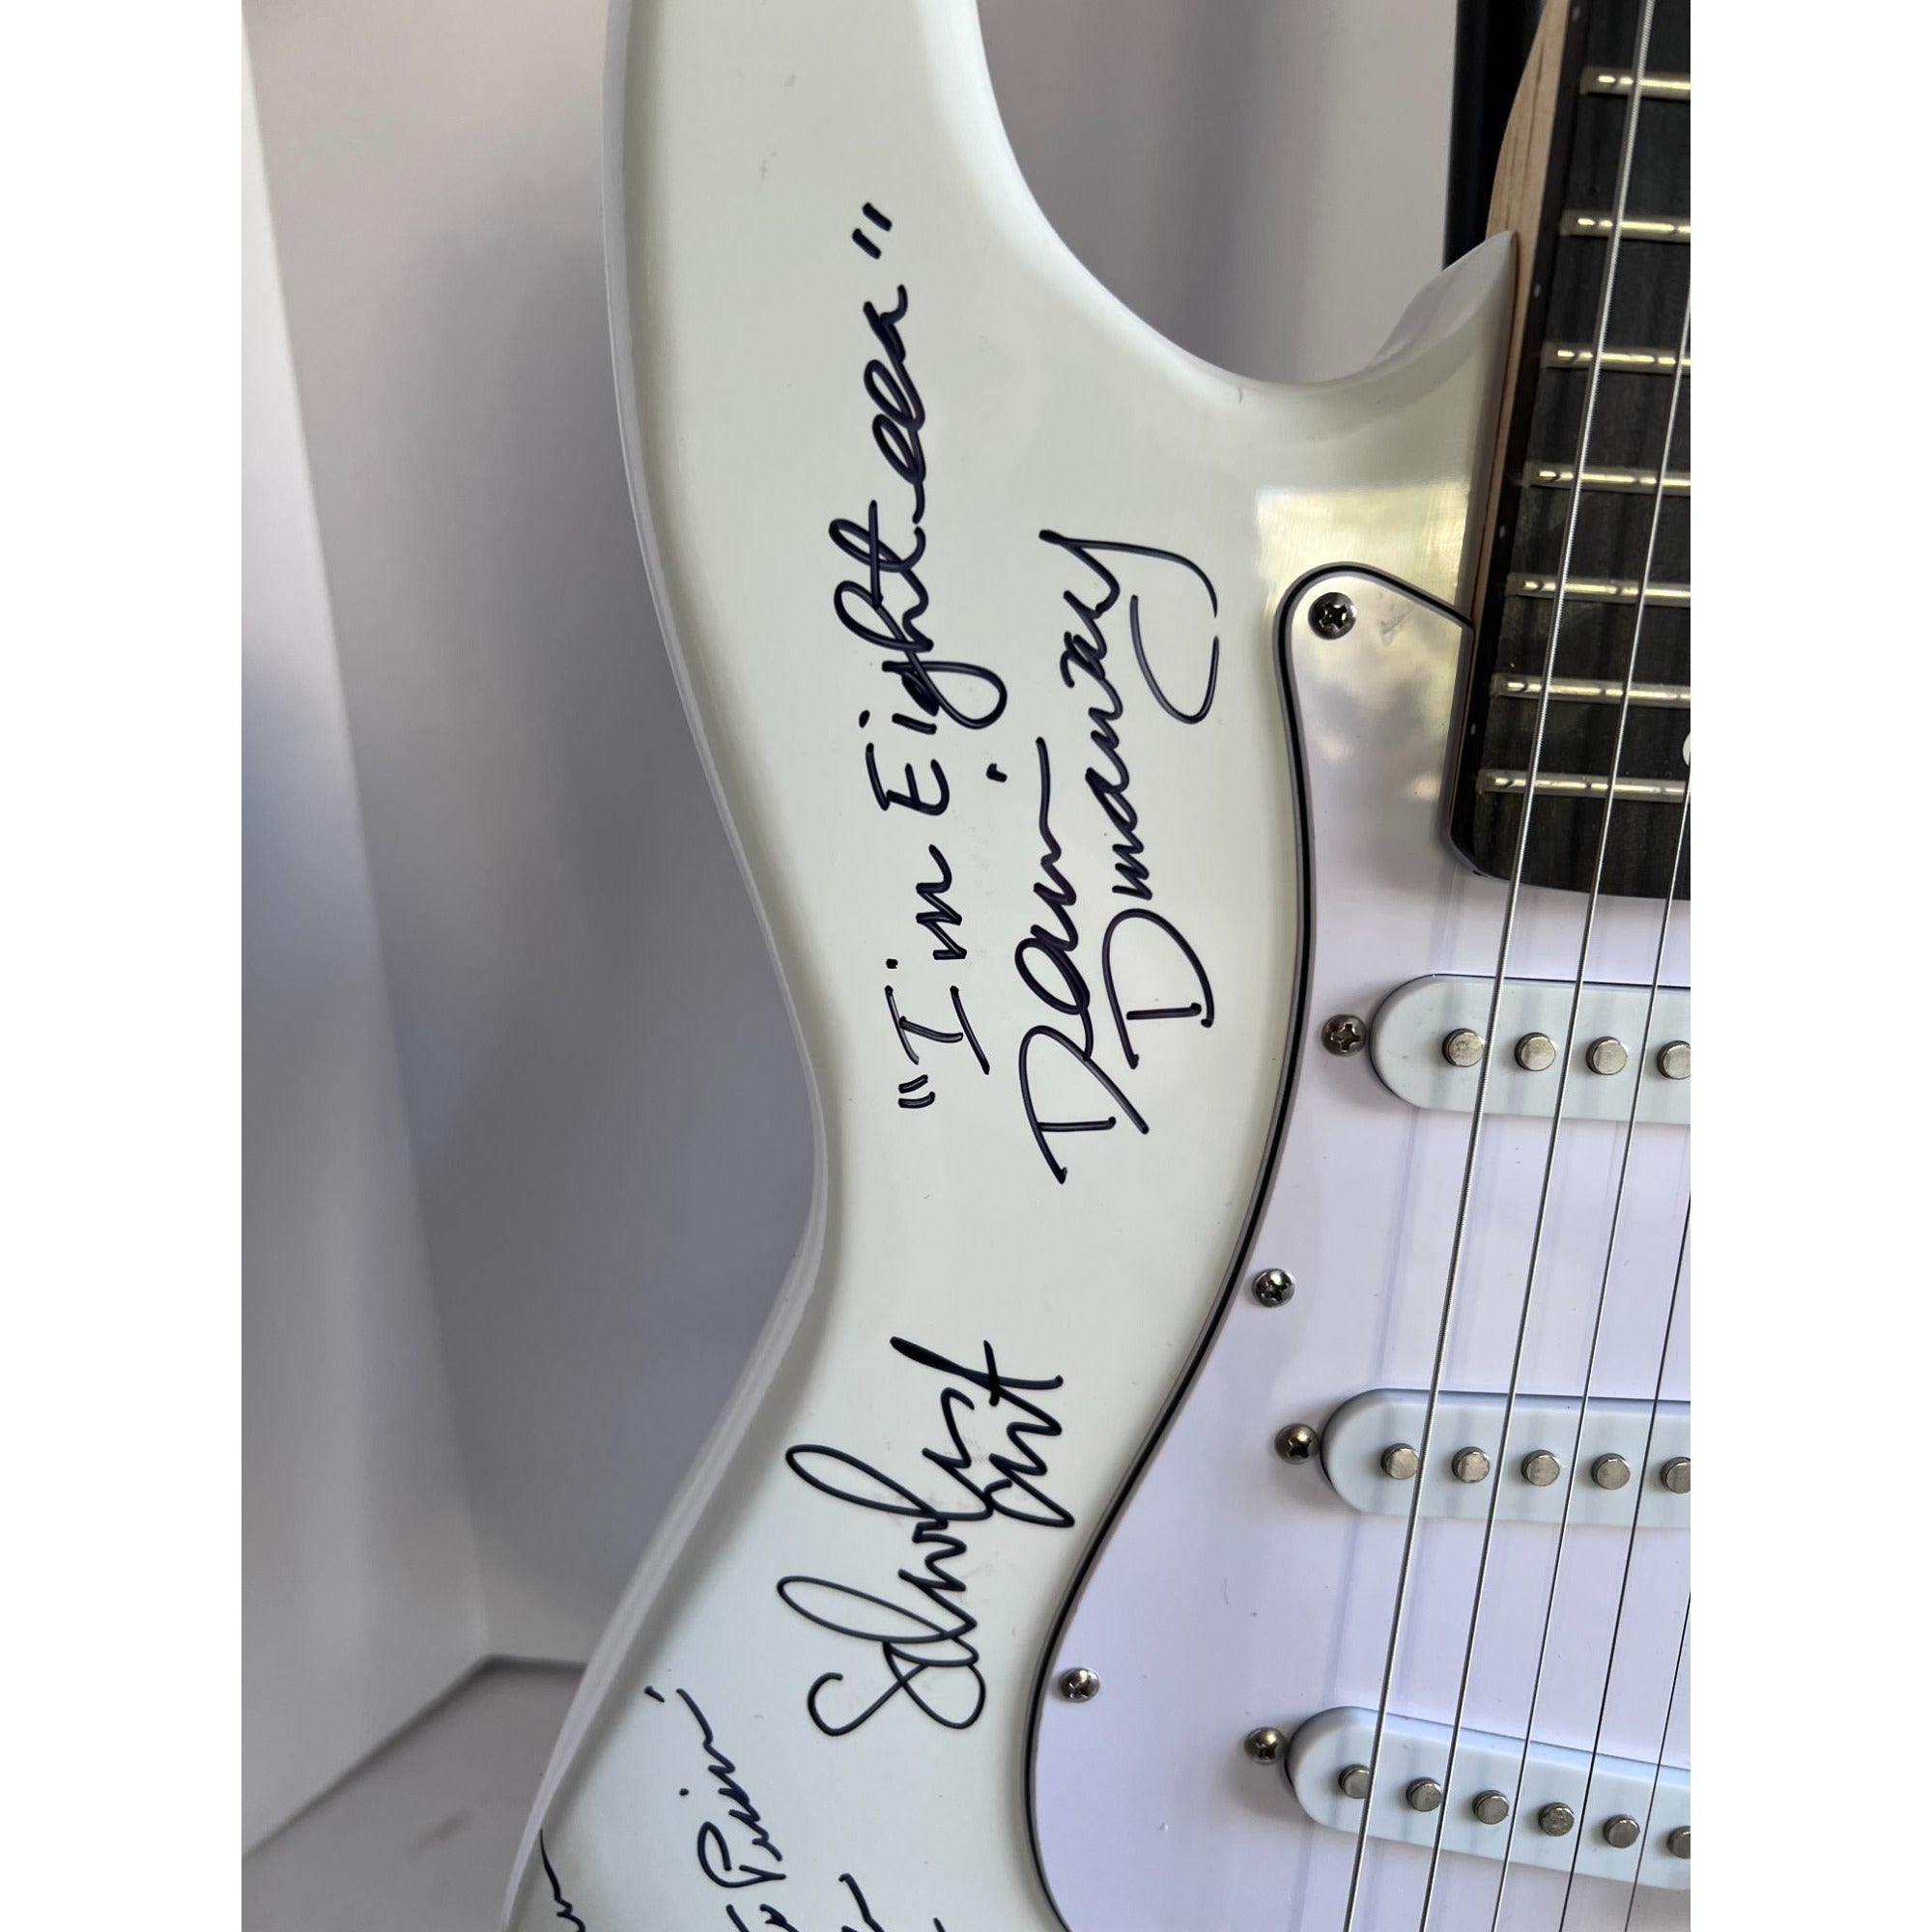 Alice Cooper Band Michael Bruce Dennis Dunaway Neil Smith stratcoster electric guitar signed with proof